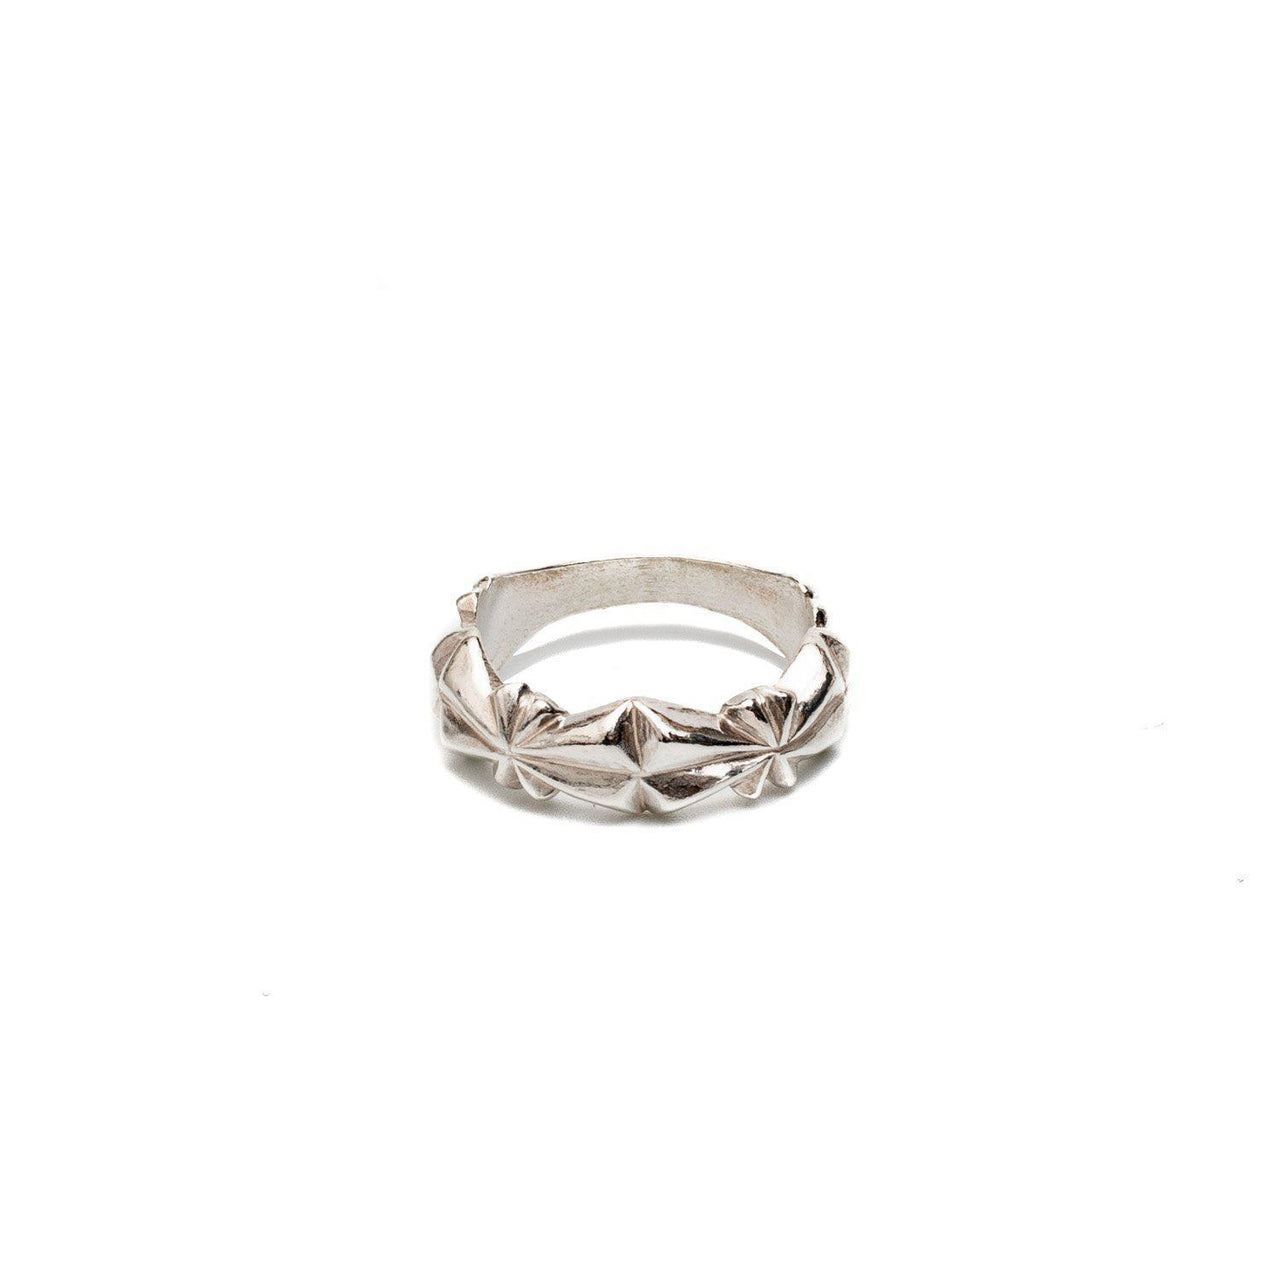 First Arrows Sandcast Plain Ring R-227-Jewellery-Clutch Cafe